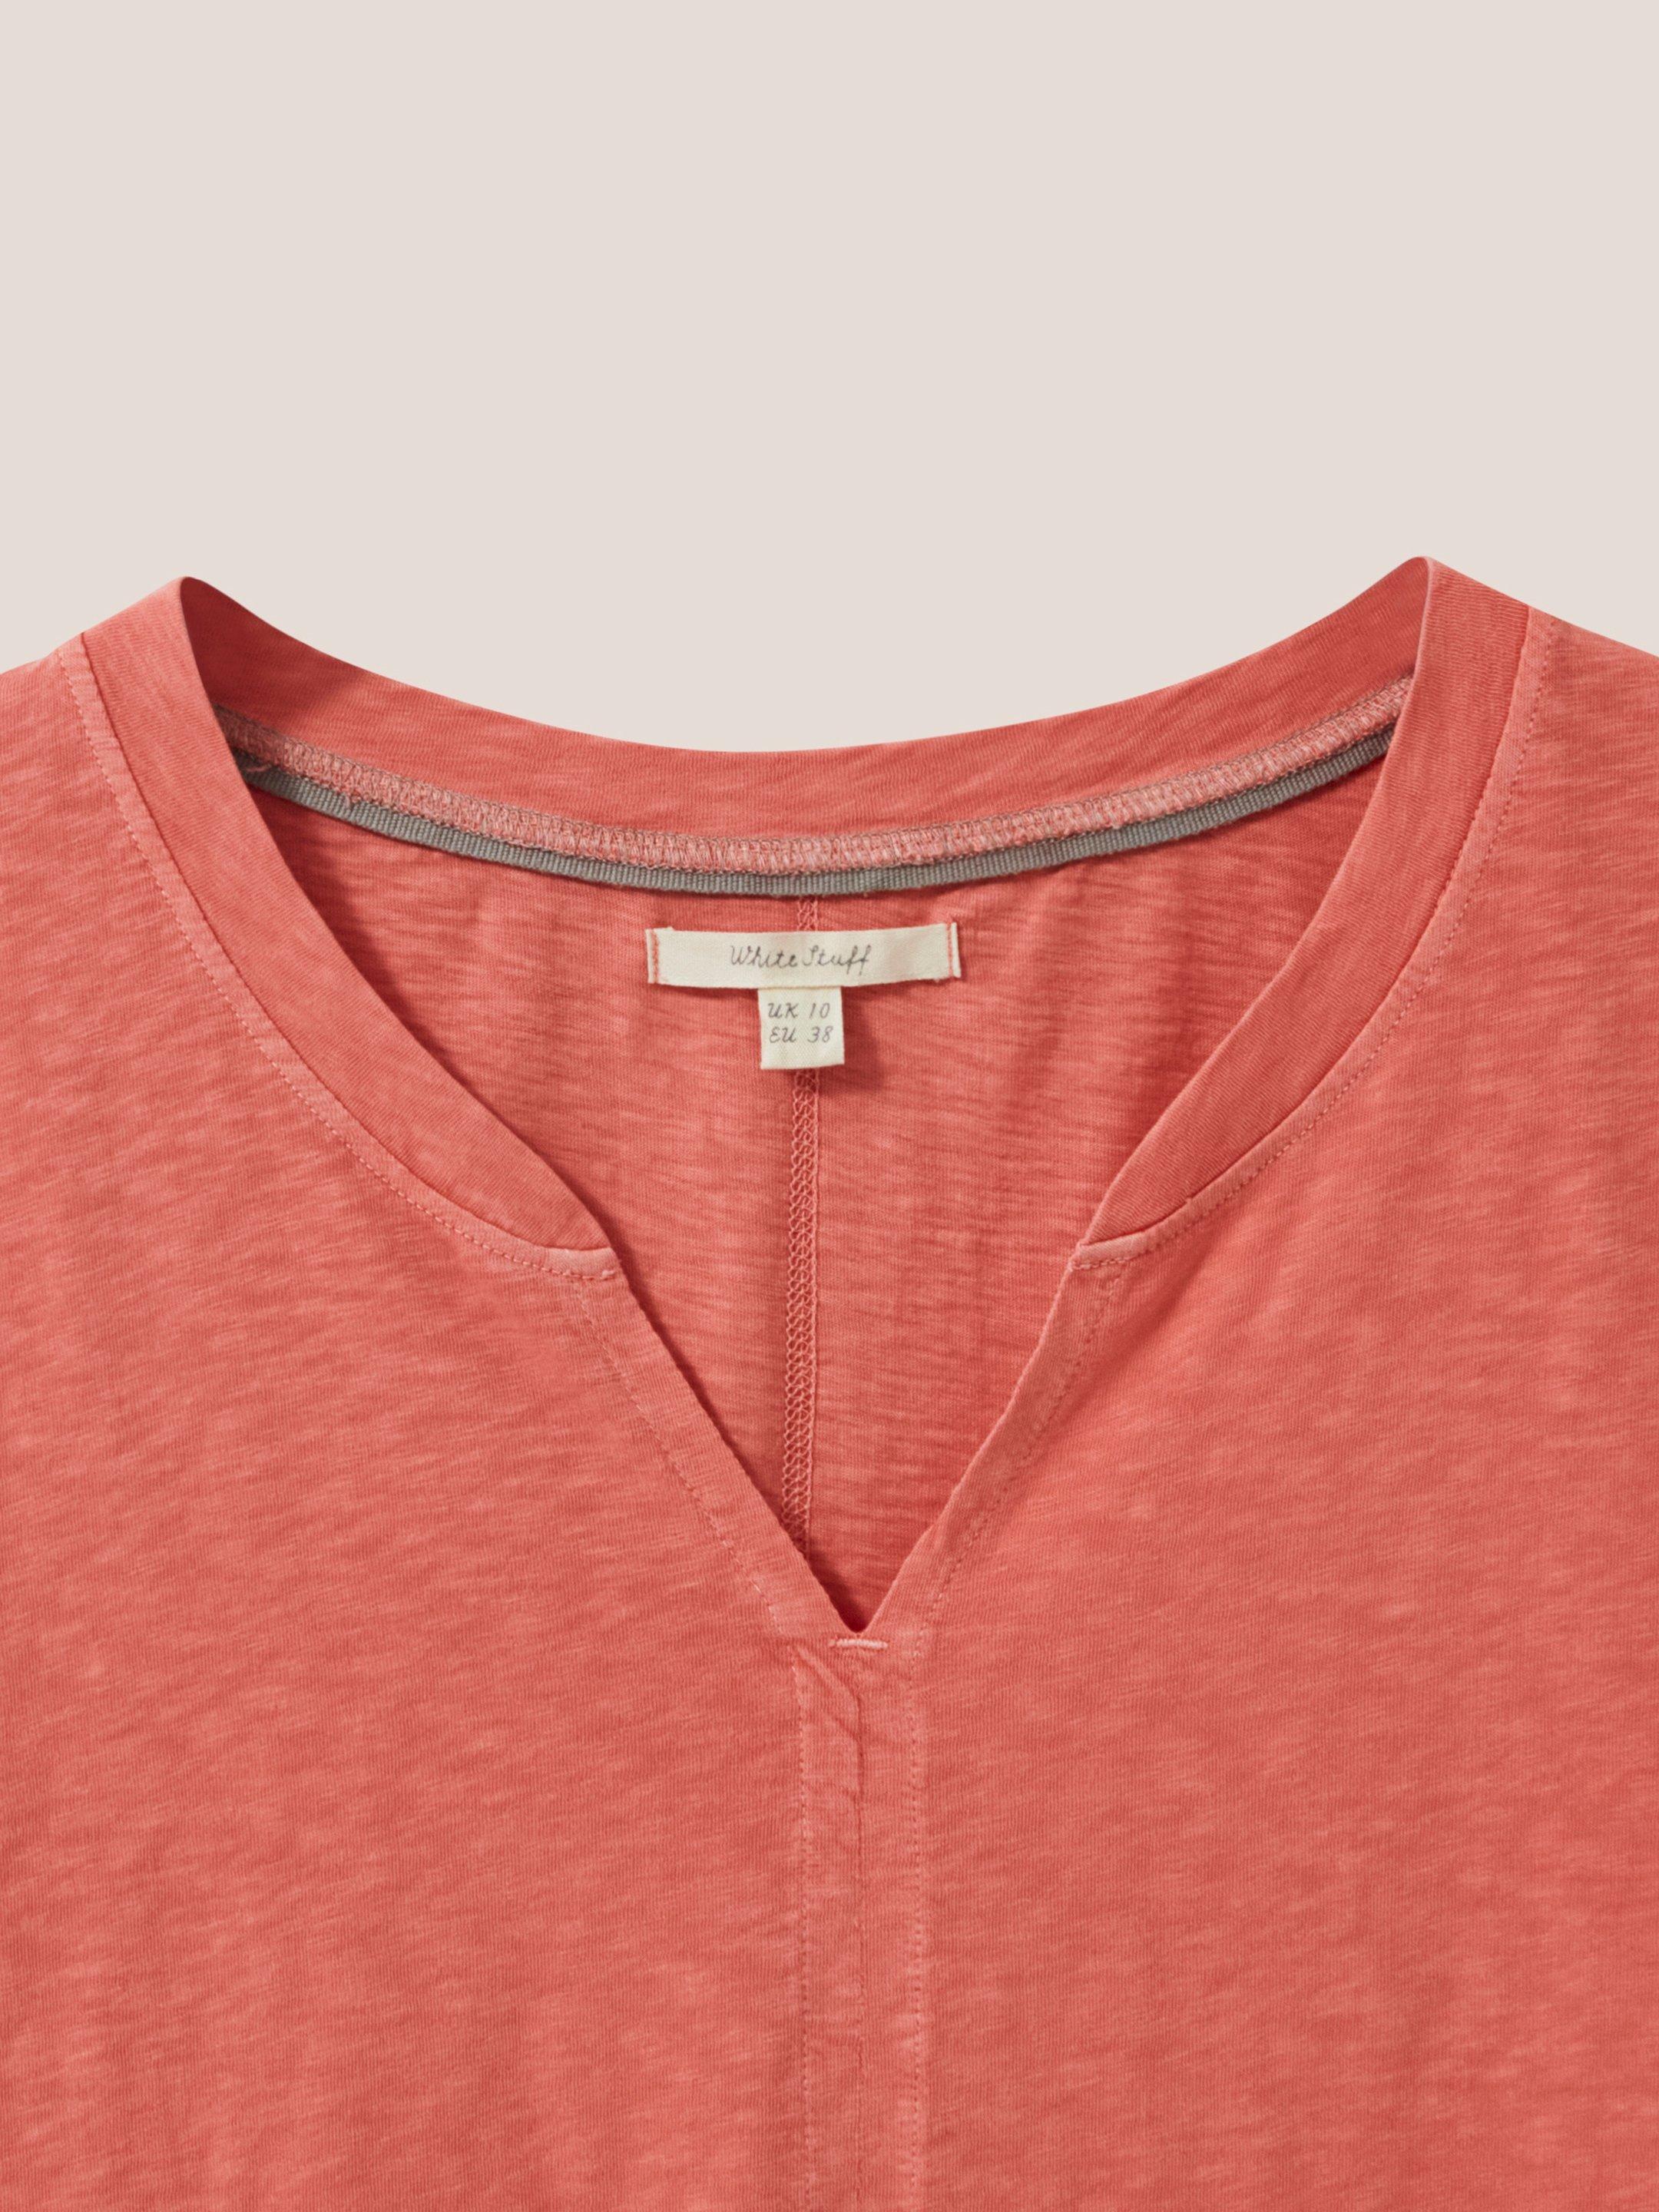 Nelly Notch Neck Tee in MID PINK - FLAT DETAIL